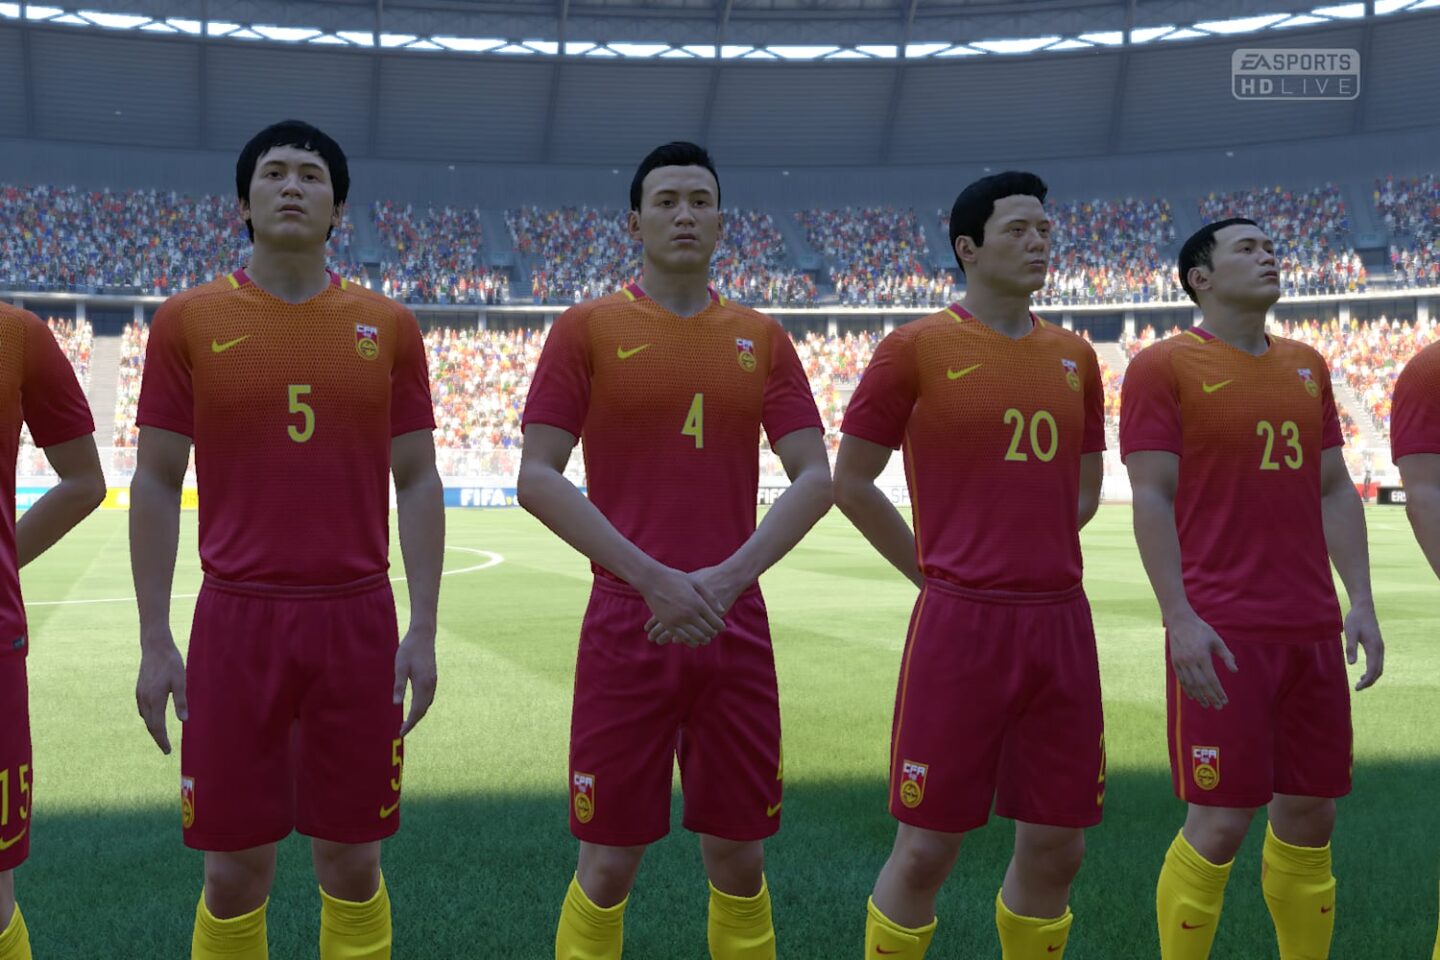 China’s intense maximum of 3 hours a week practice stands them in good stead for an upset of Australia on FIFA tonight, and if not and they’re losing late in the game, then a ‘fuck this’ and console reset